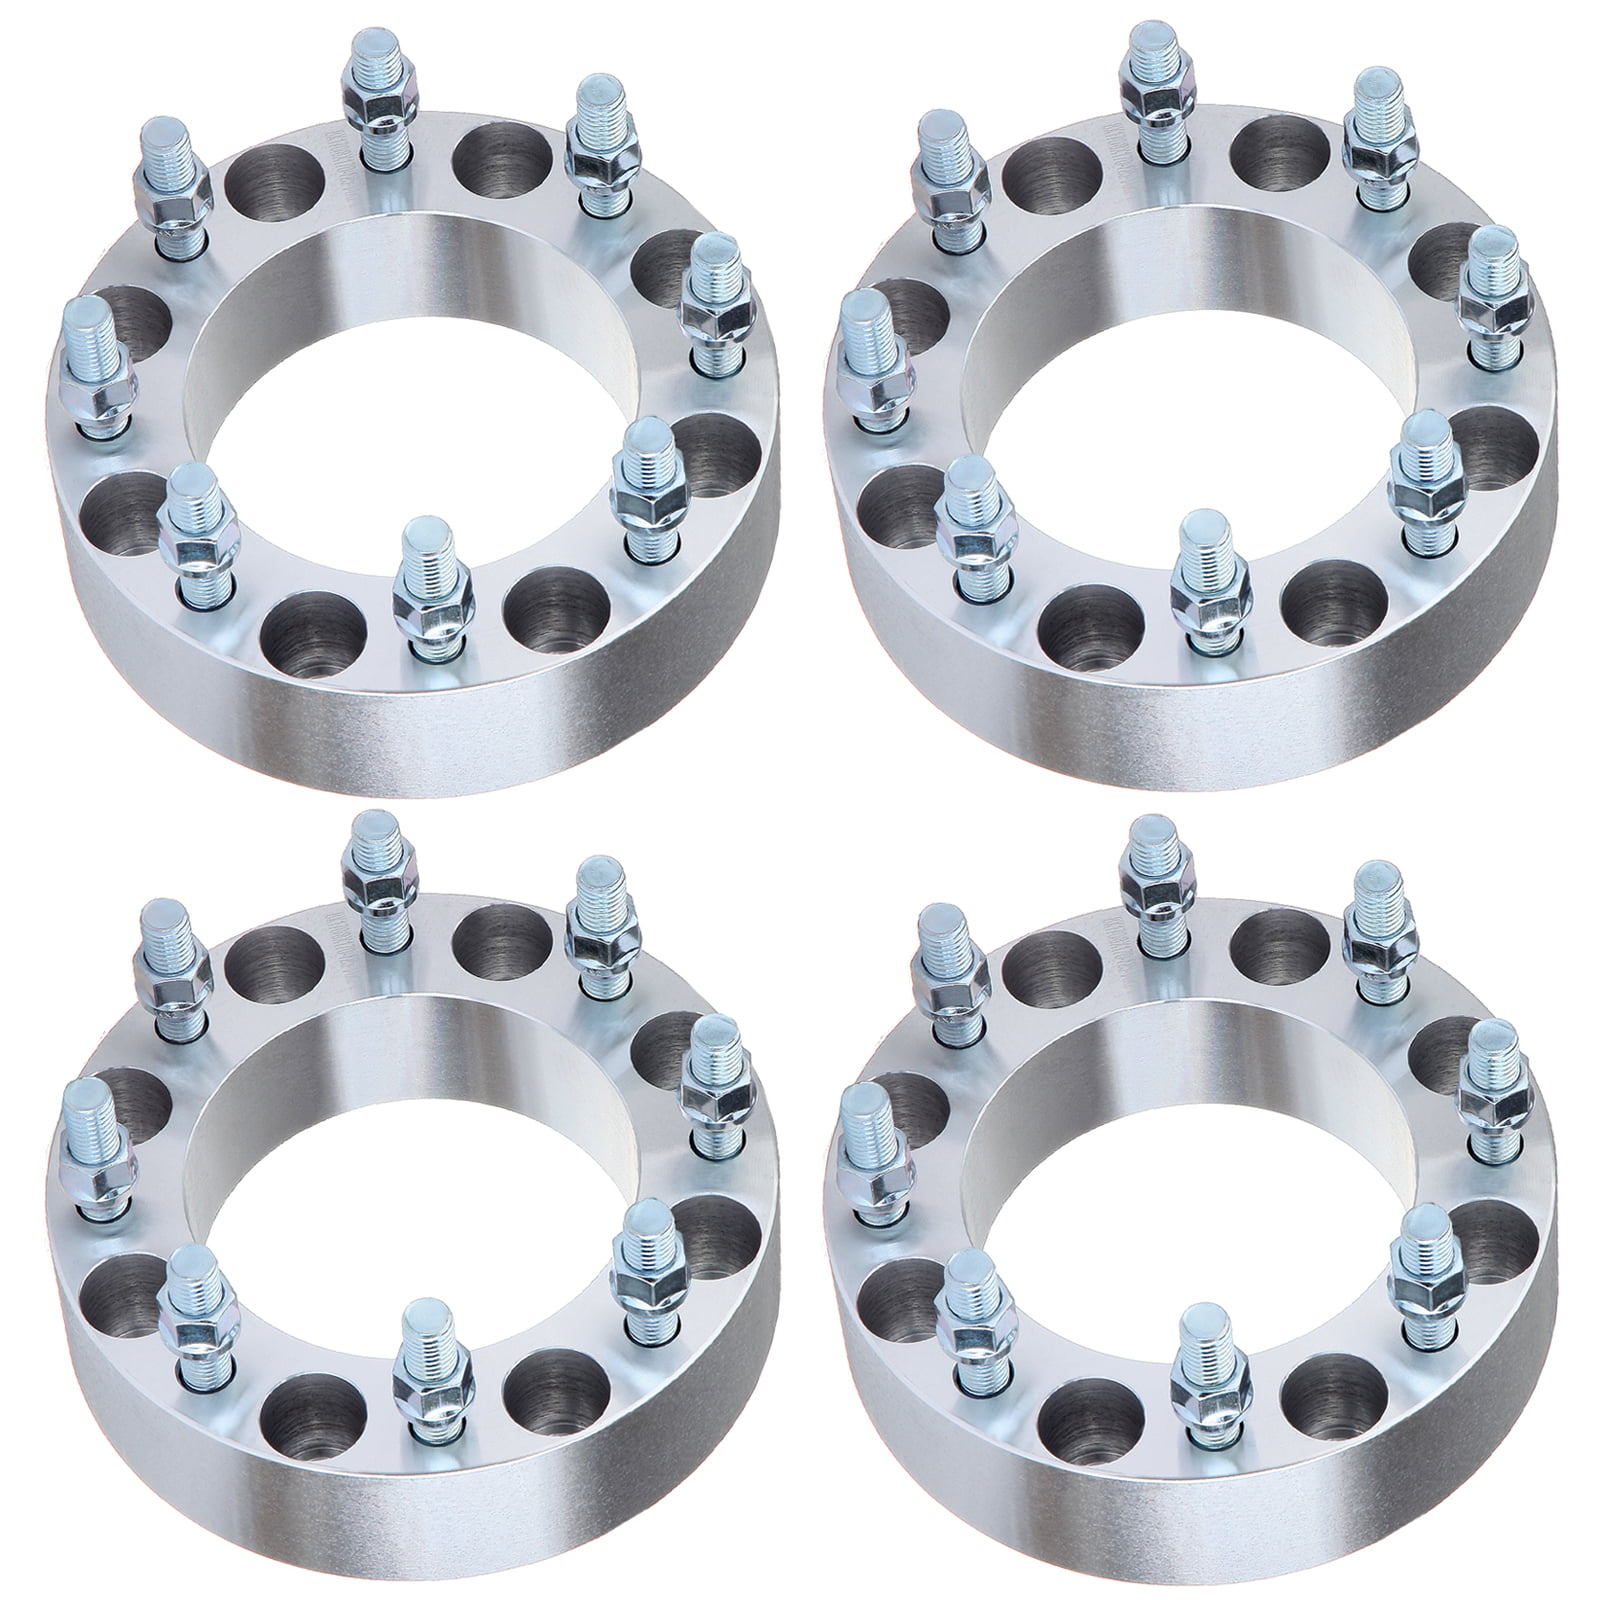 50mm cciyu 8 Lug Wheel spacers 2 8x170mm to 8x170mm with 14x2 Studs Wheel spacers Compatible with 1999-2004 Ford F-350 